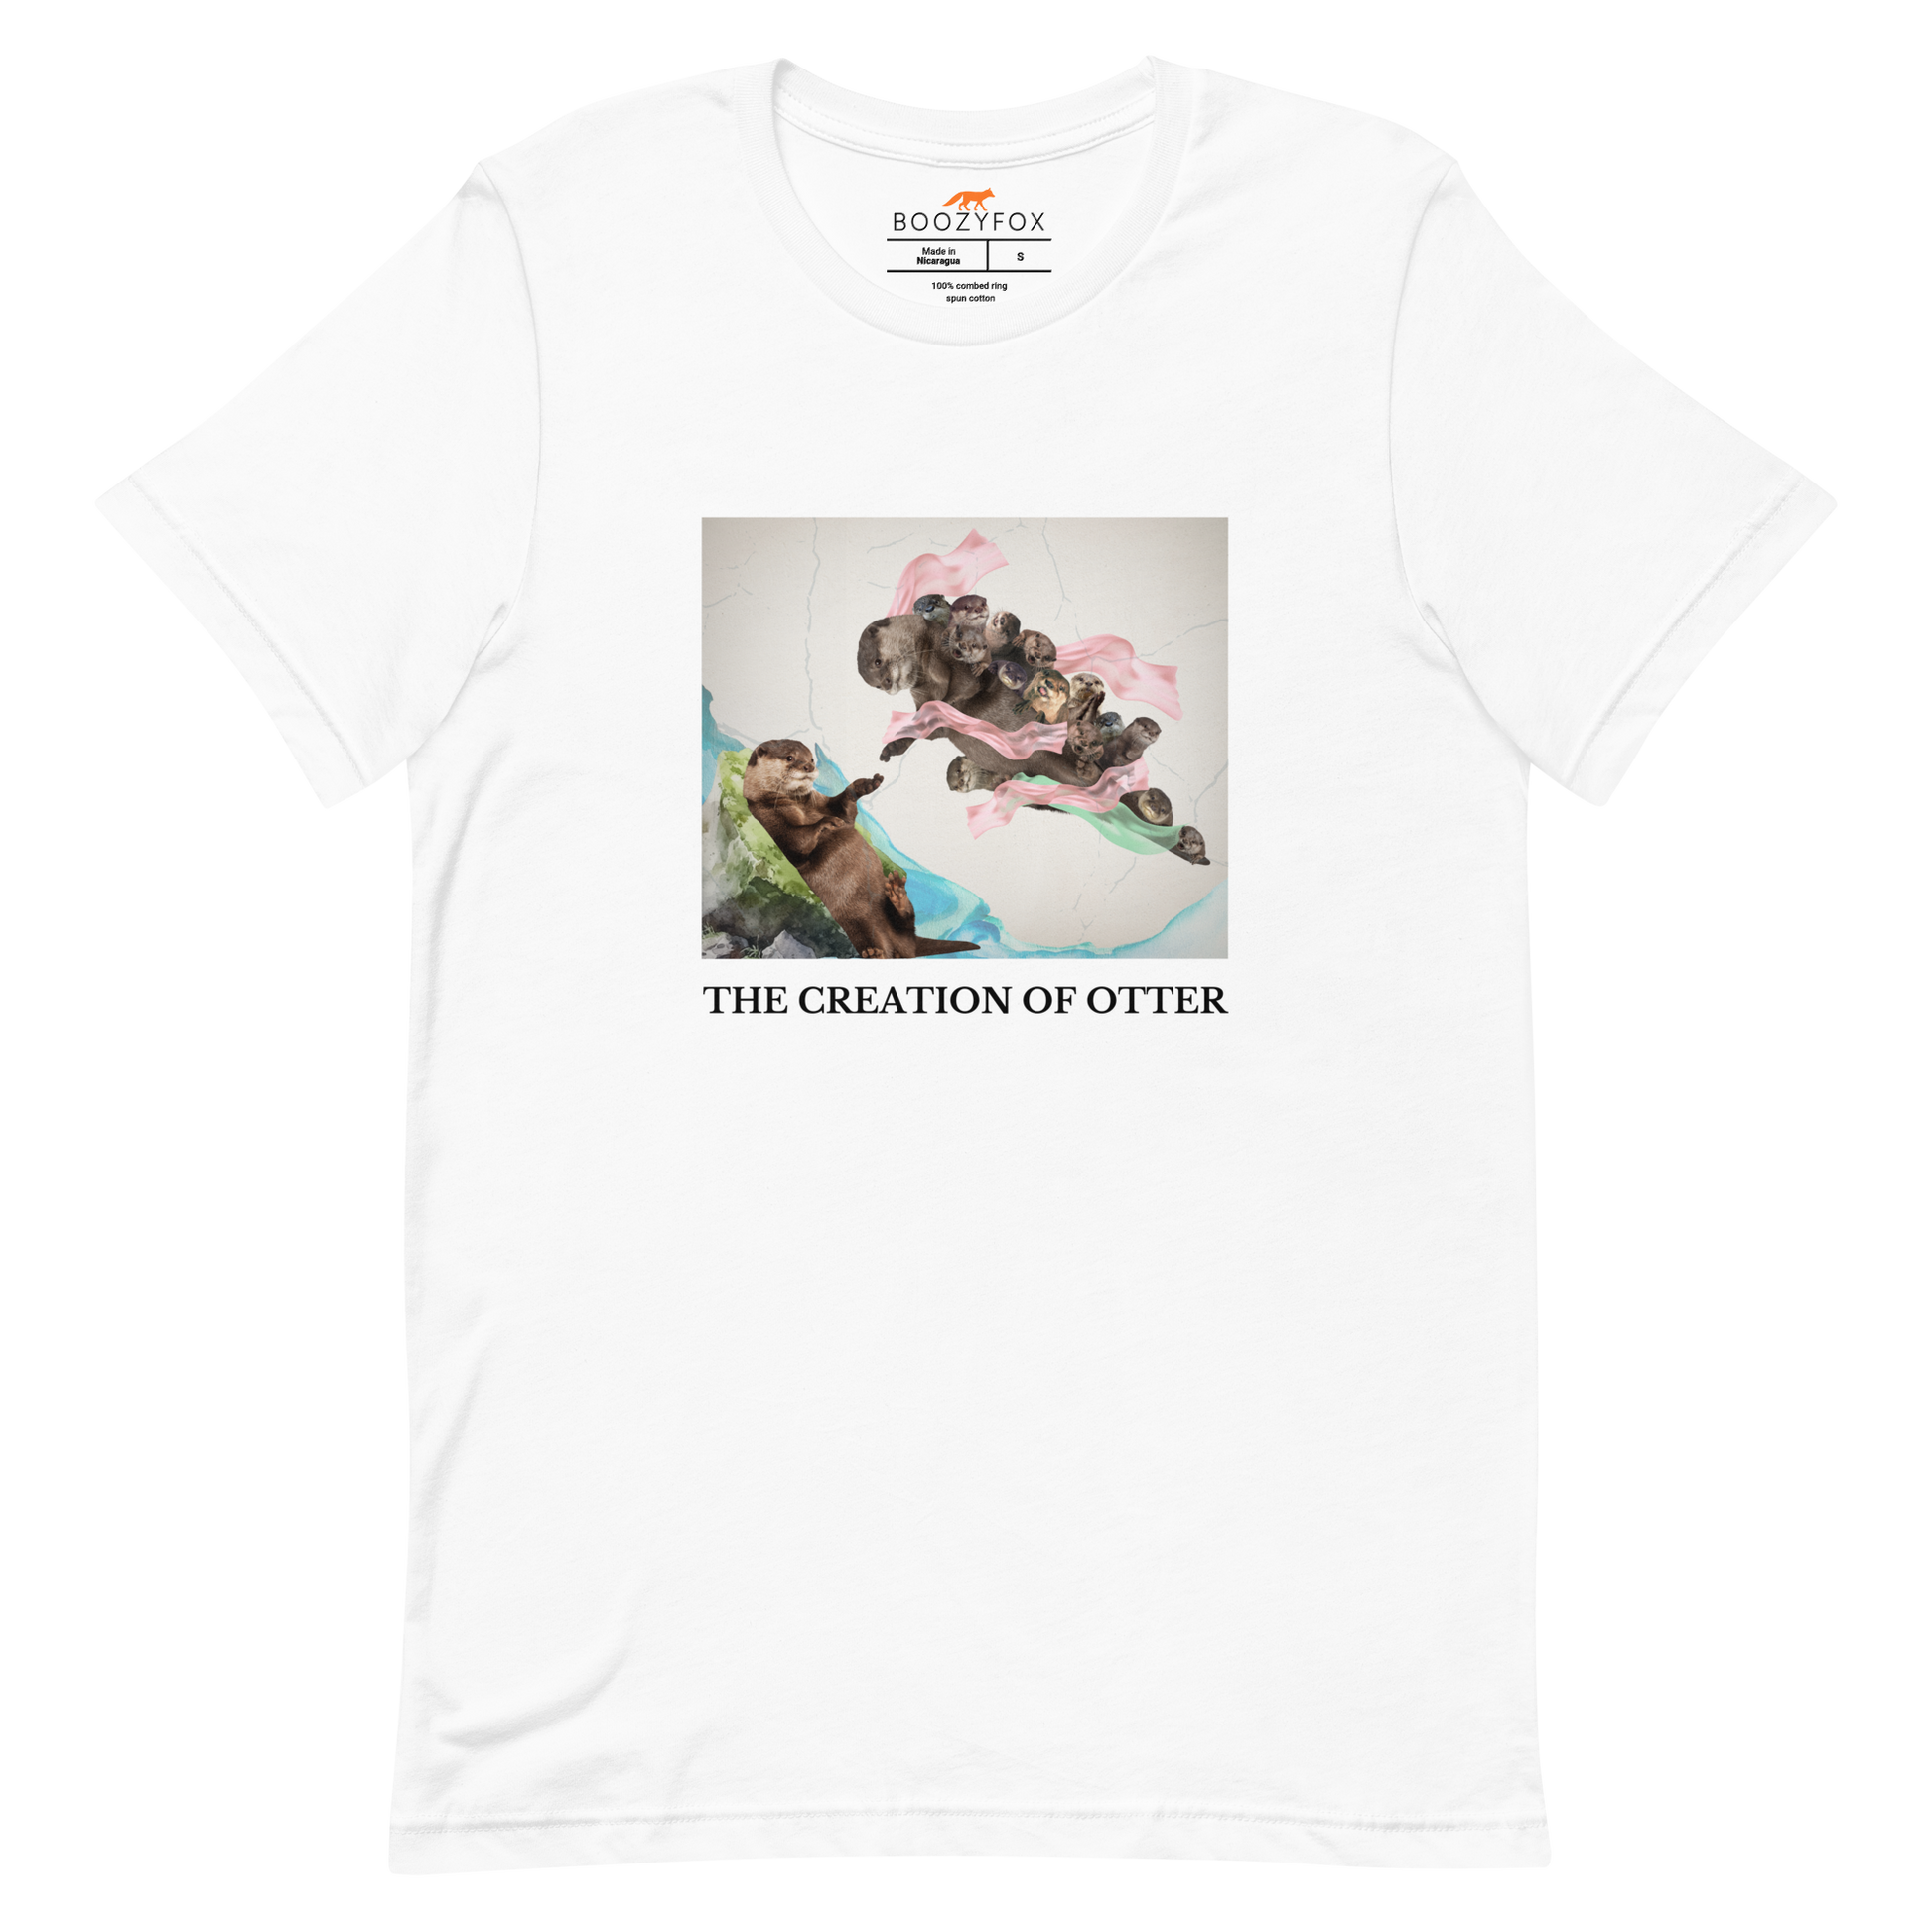 White Premium Otter Tee featuring a playful The Creation of Otter parody of Michelangelo's masterpiece - Artsy/Funny Graphic Otter Tees - Boozy Fox